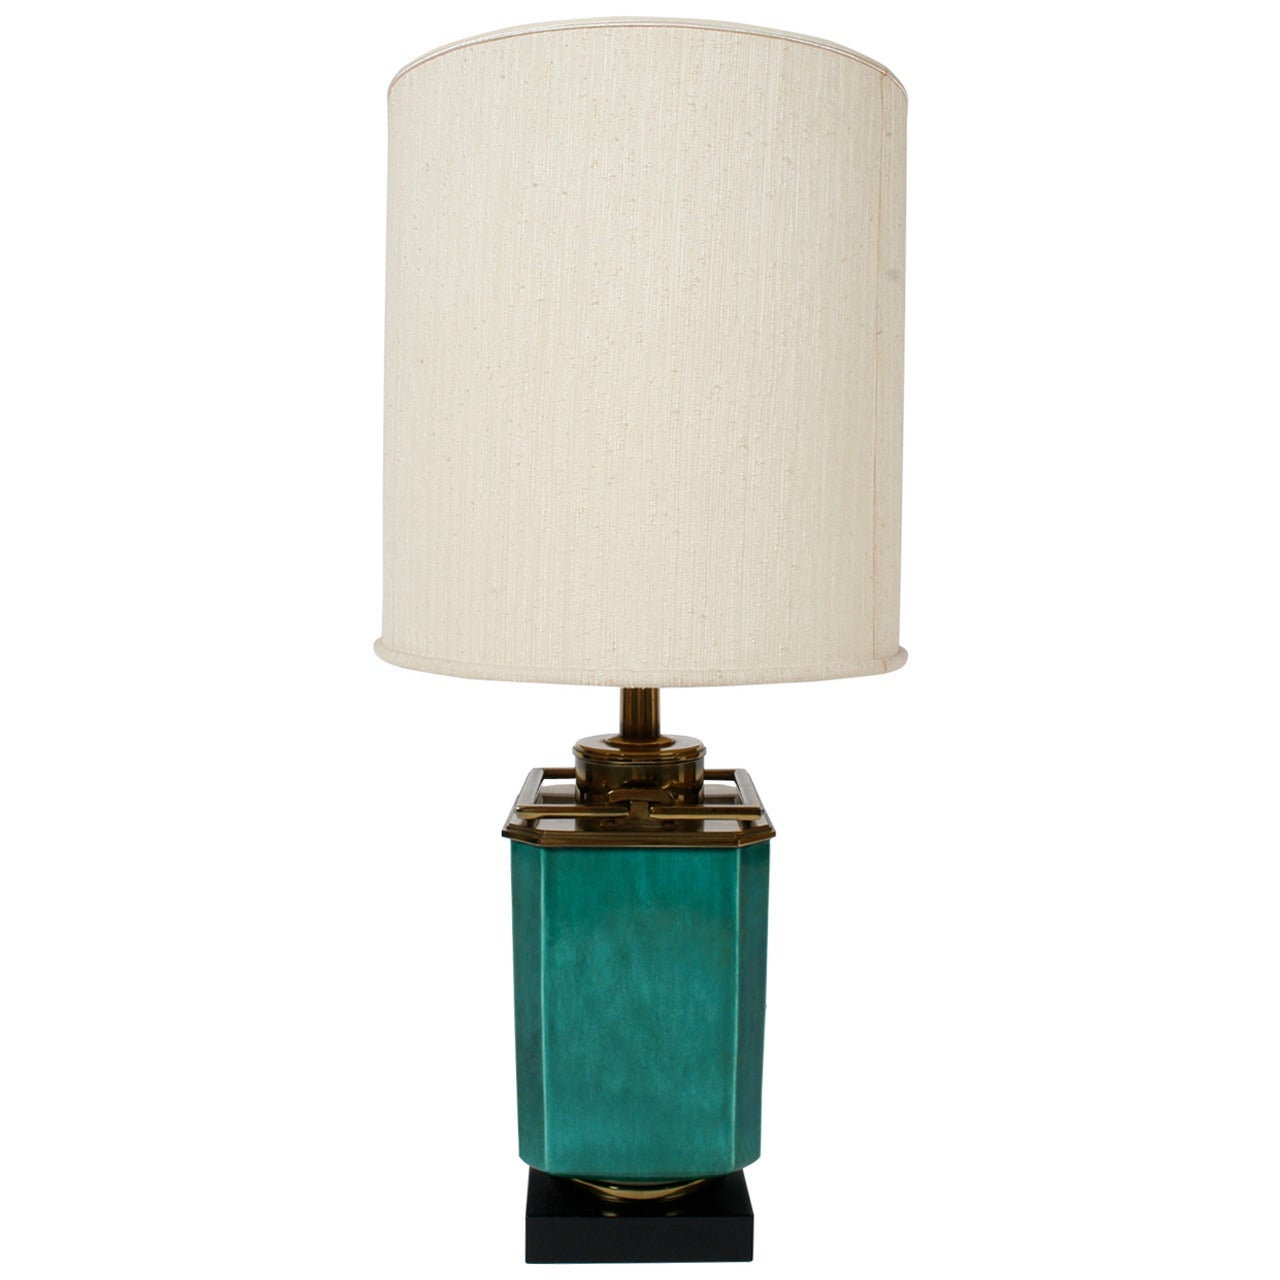 Large Stiffel Green Ceramic Asian Style Table Lamp with Brass Fittings For Sale